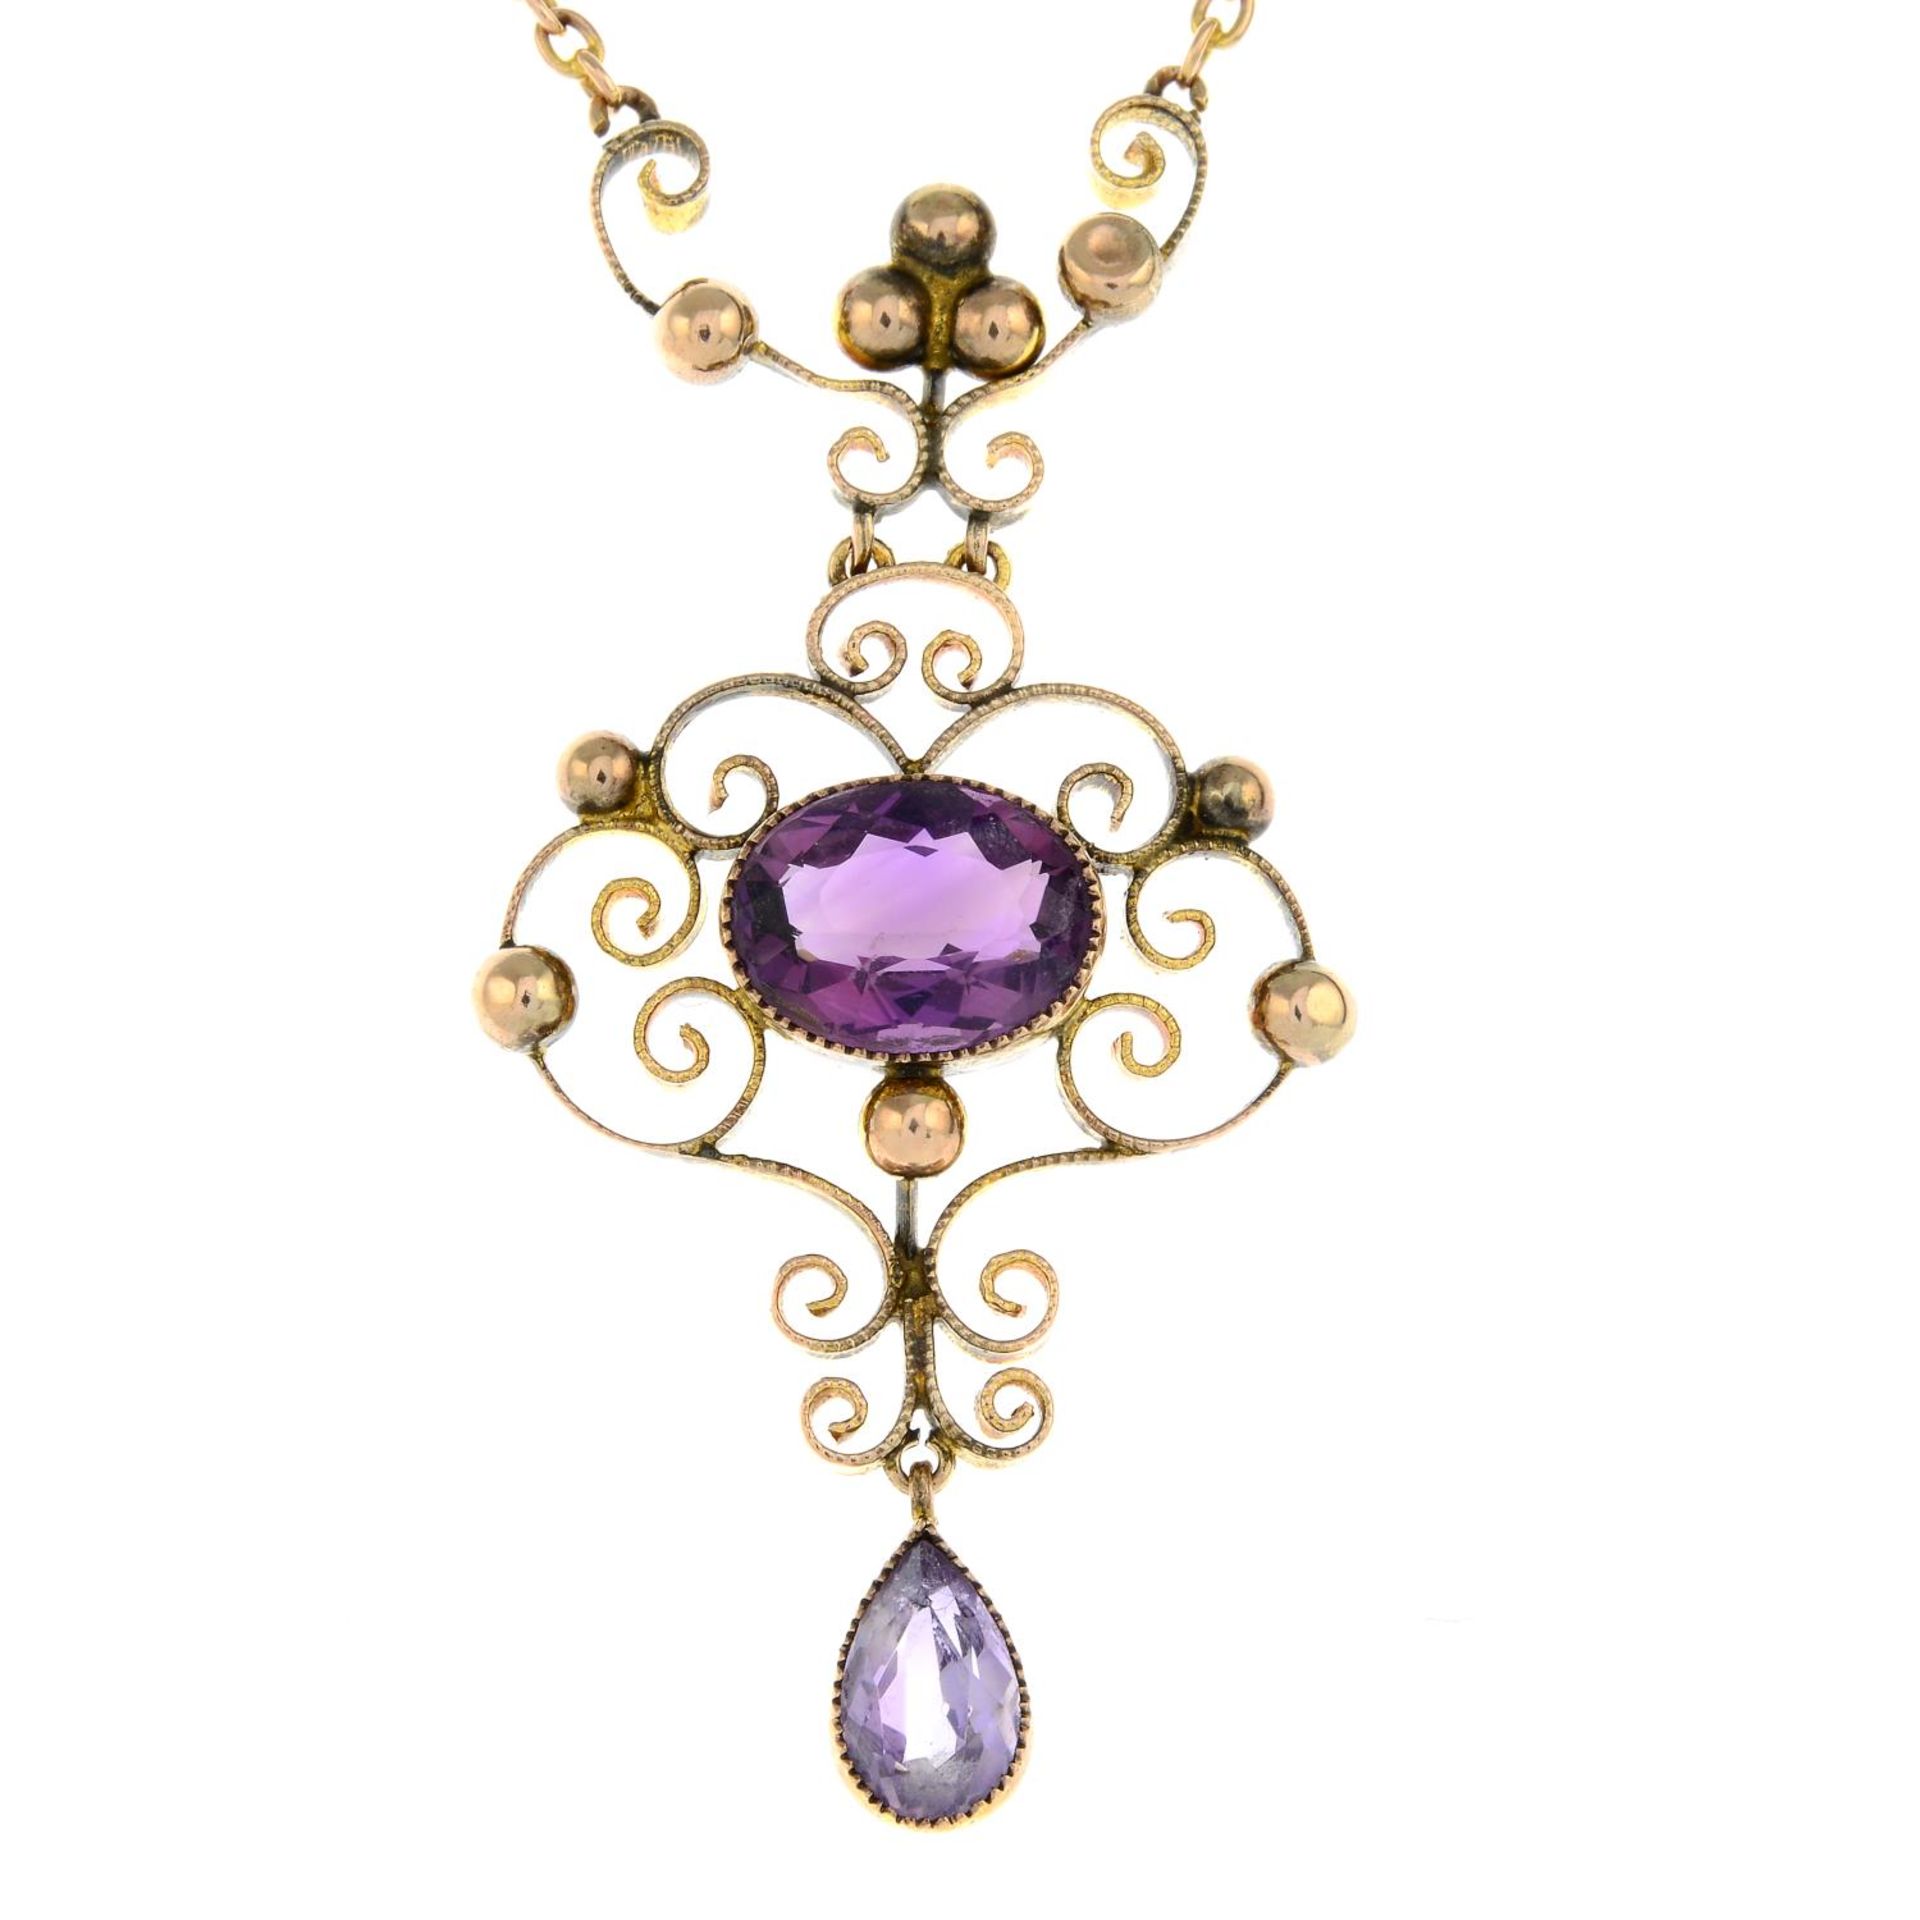 An early 20th century gold amethyst pendant, on an integral chain.Length of pendant drop 4.5cms.